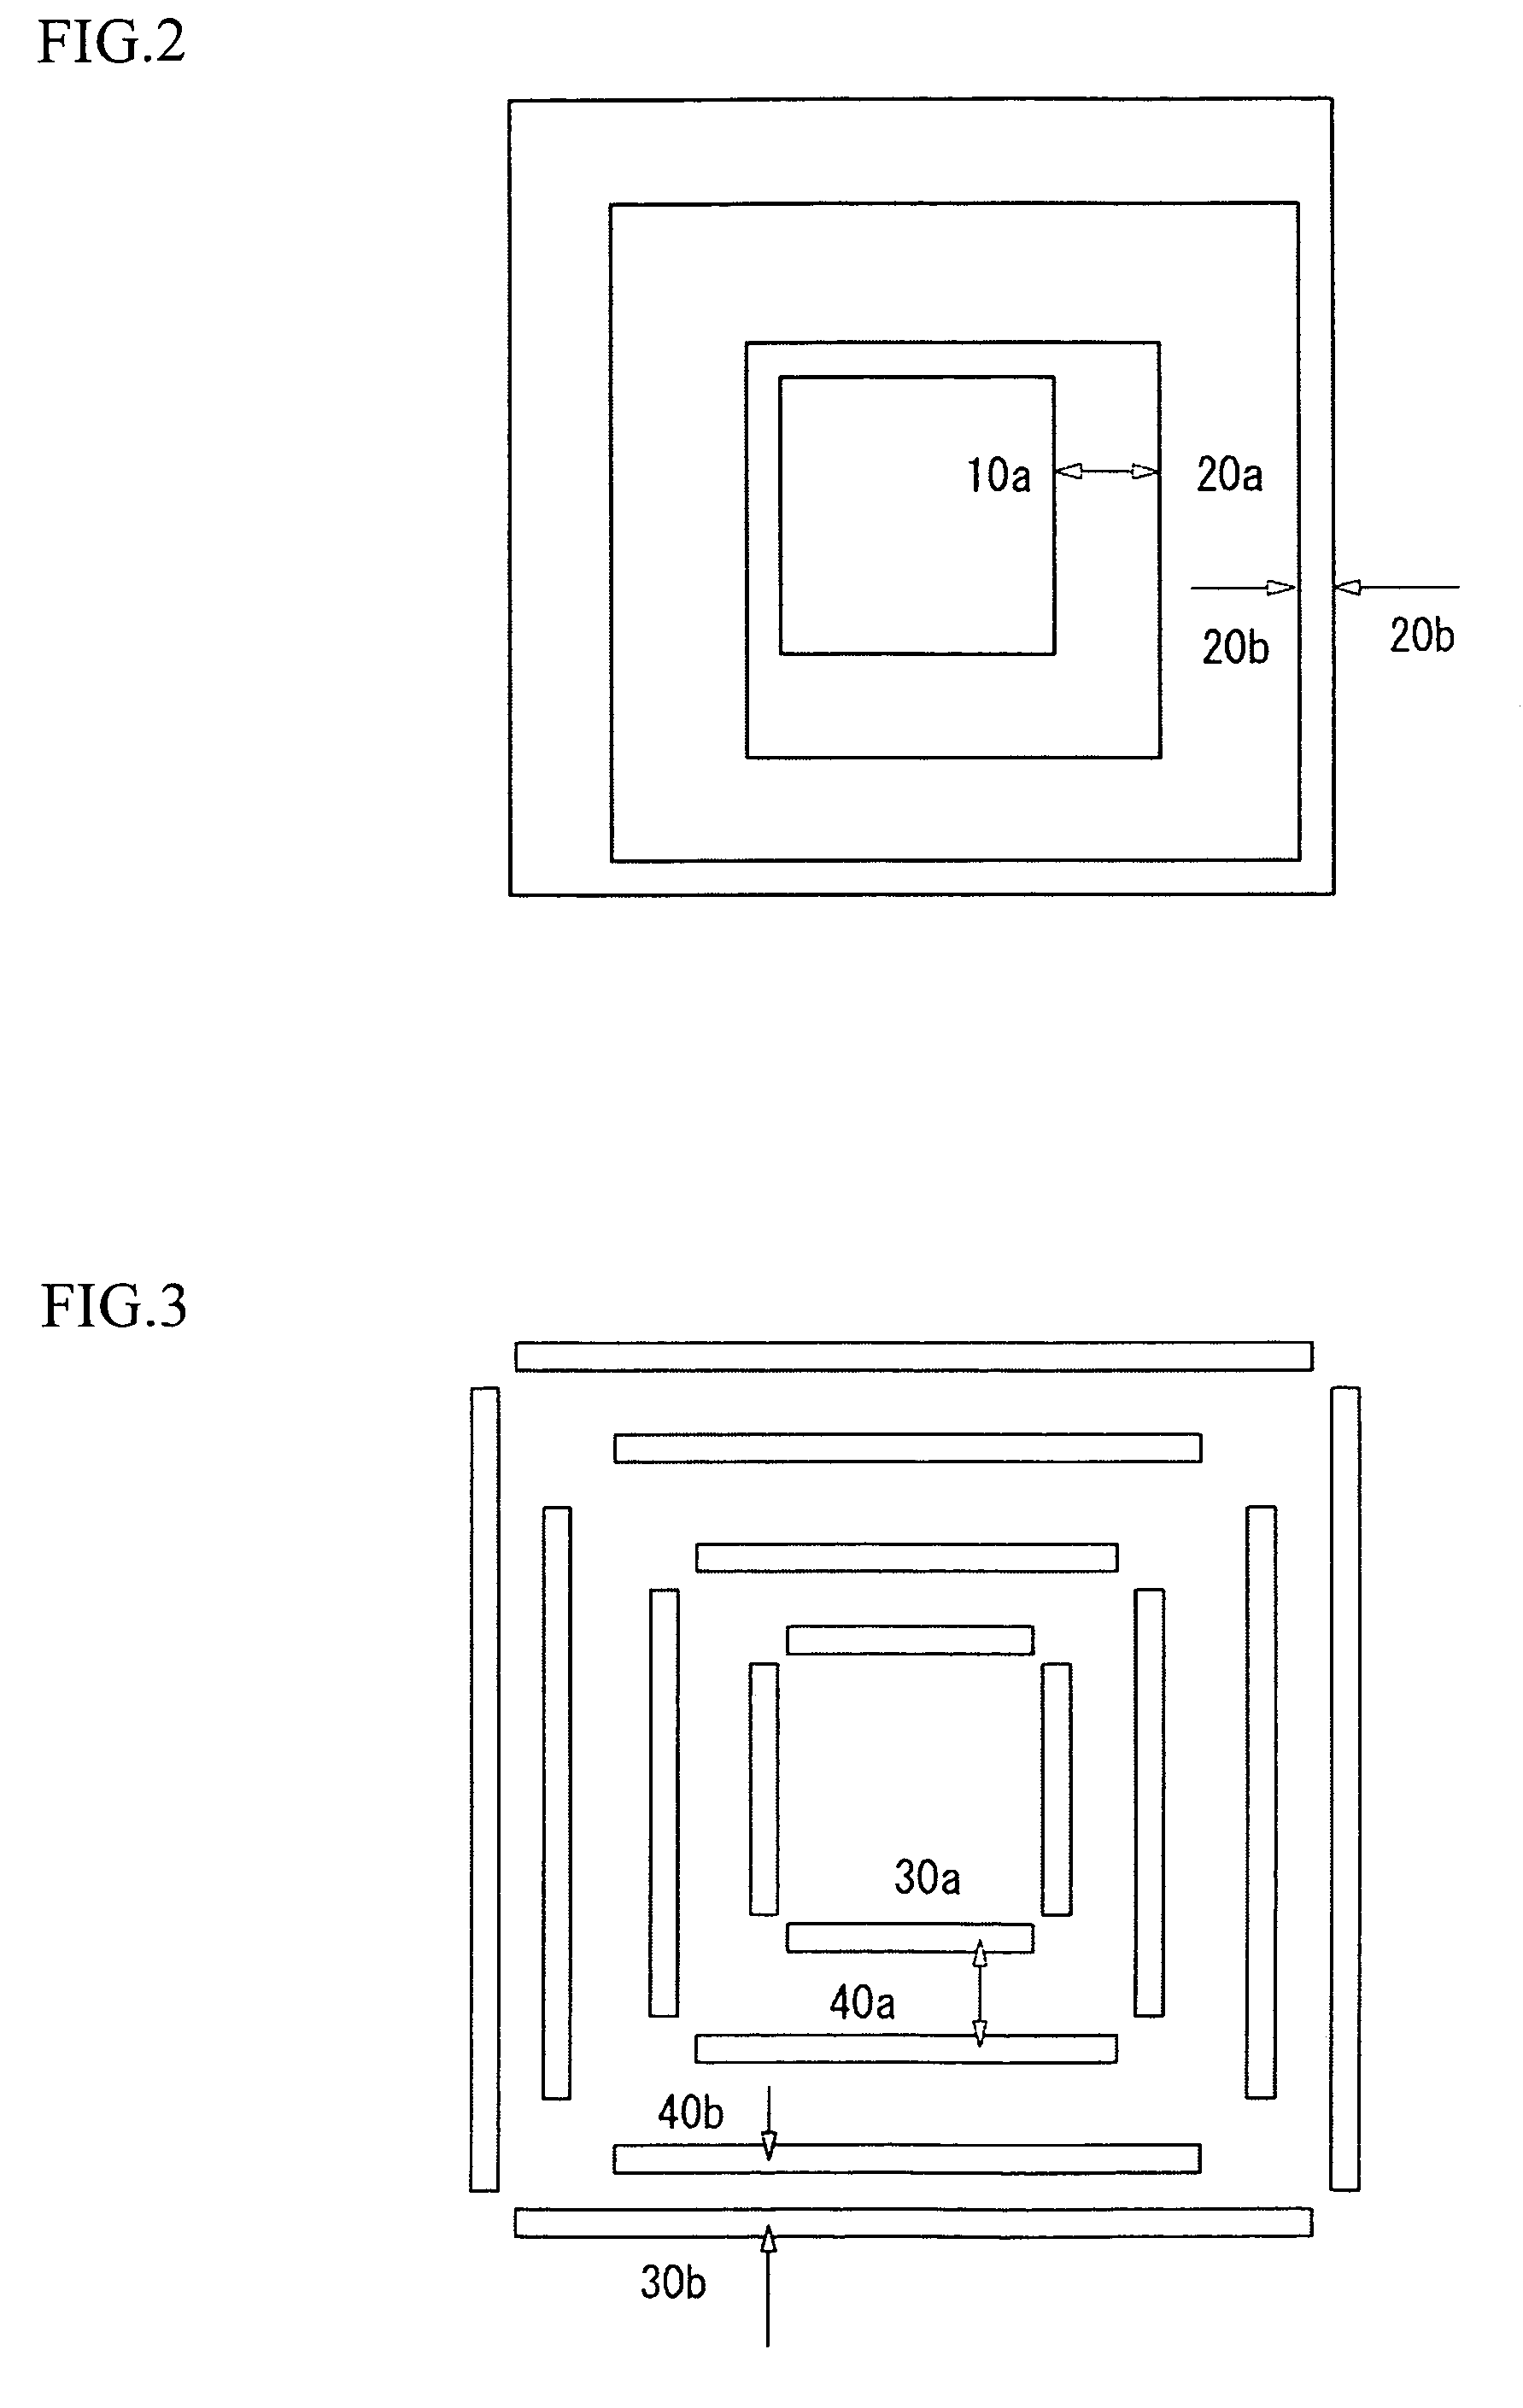 Method of detecting displacement of exposure position marks